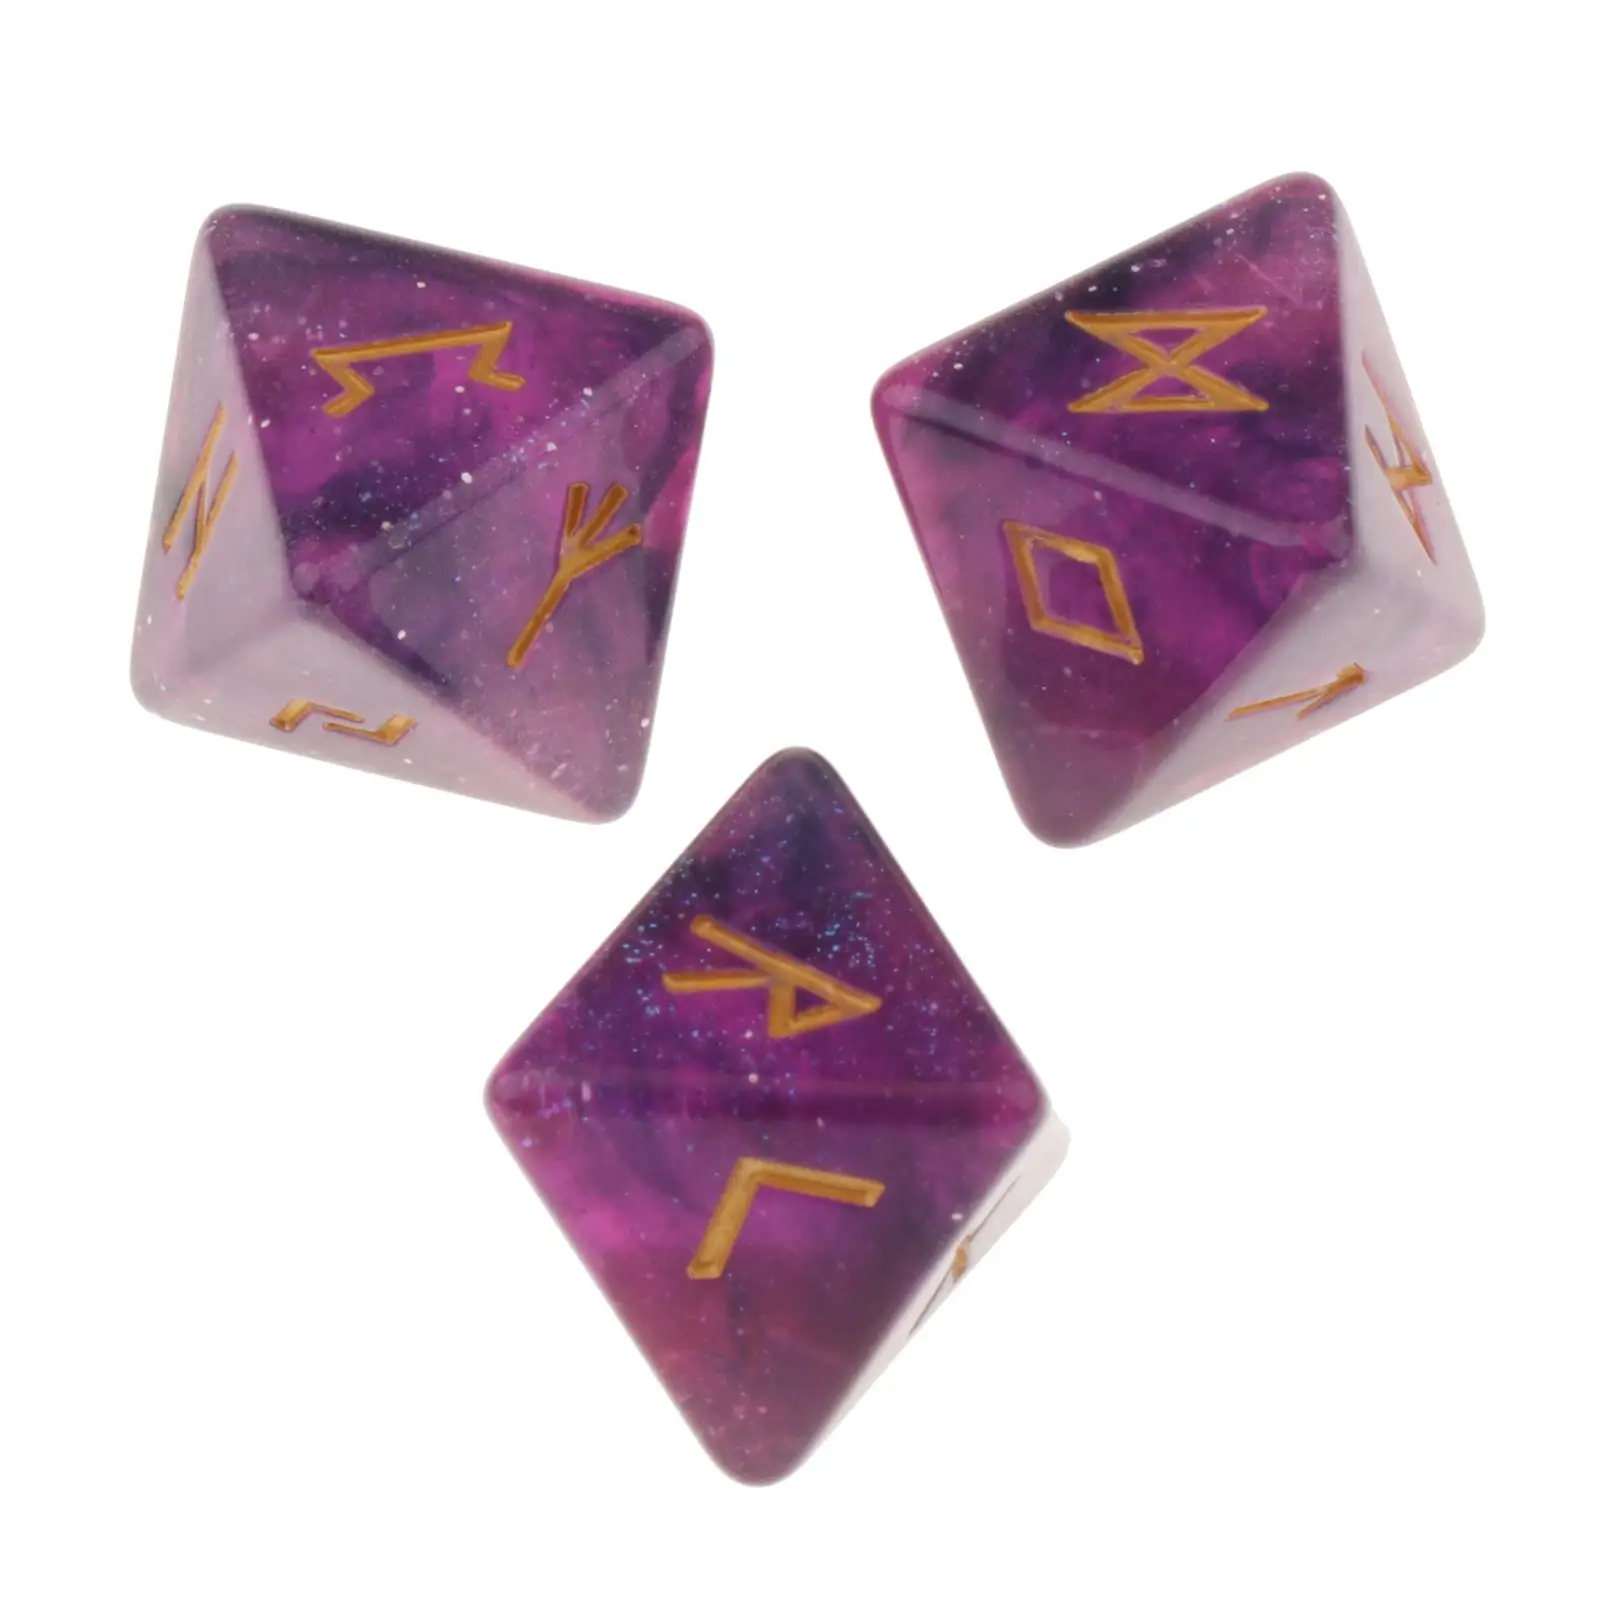 Durable Starry Star Rune Resin Polyhedral Divination Dice Astrology Good Polishing Effect for Board Roll Playing Games